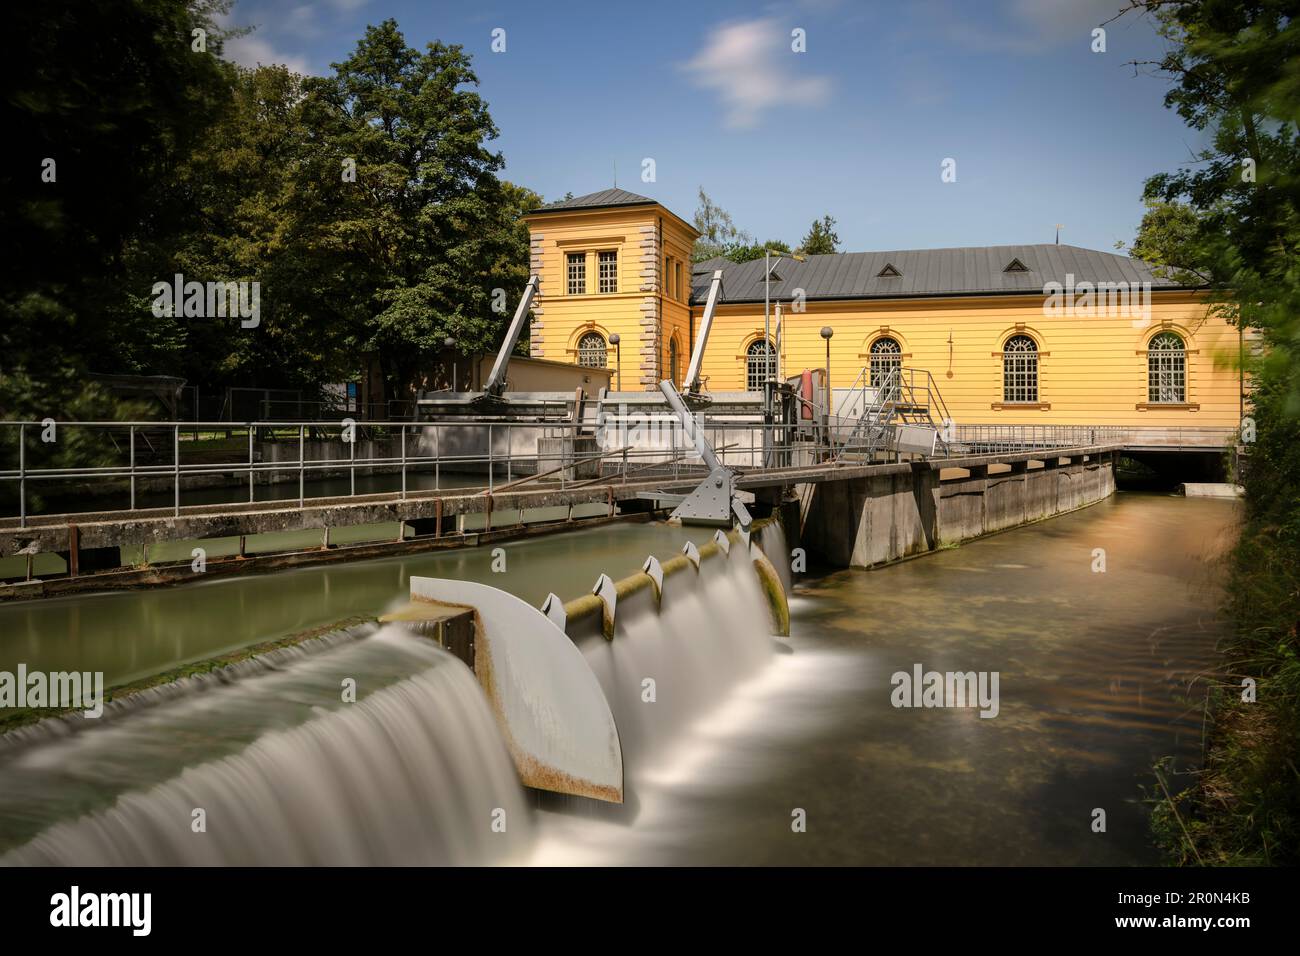 Water Management System of Augsburg - UNESCO World Heritage Centre